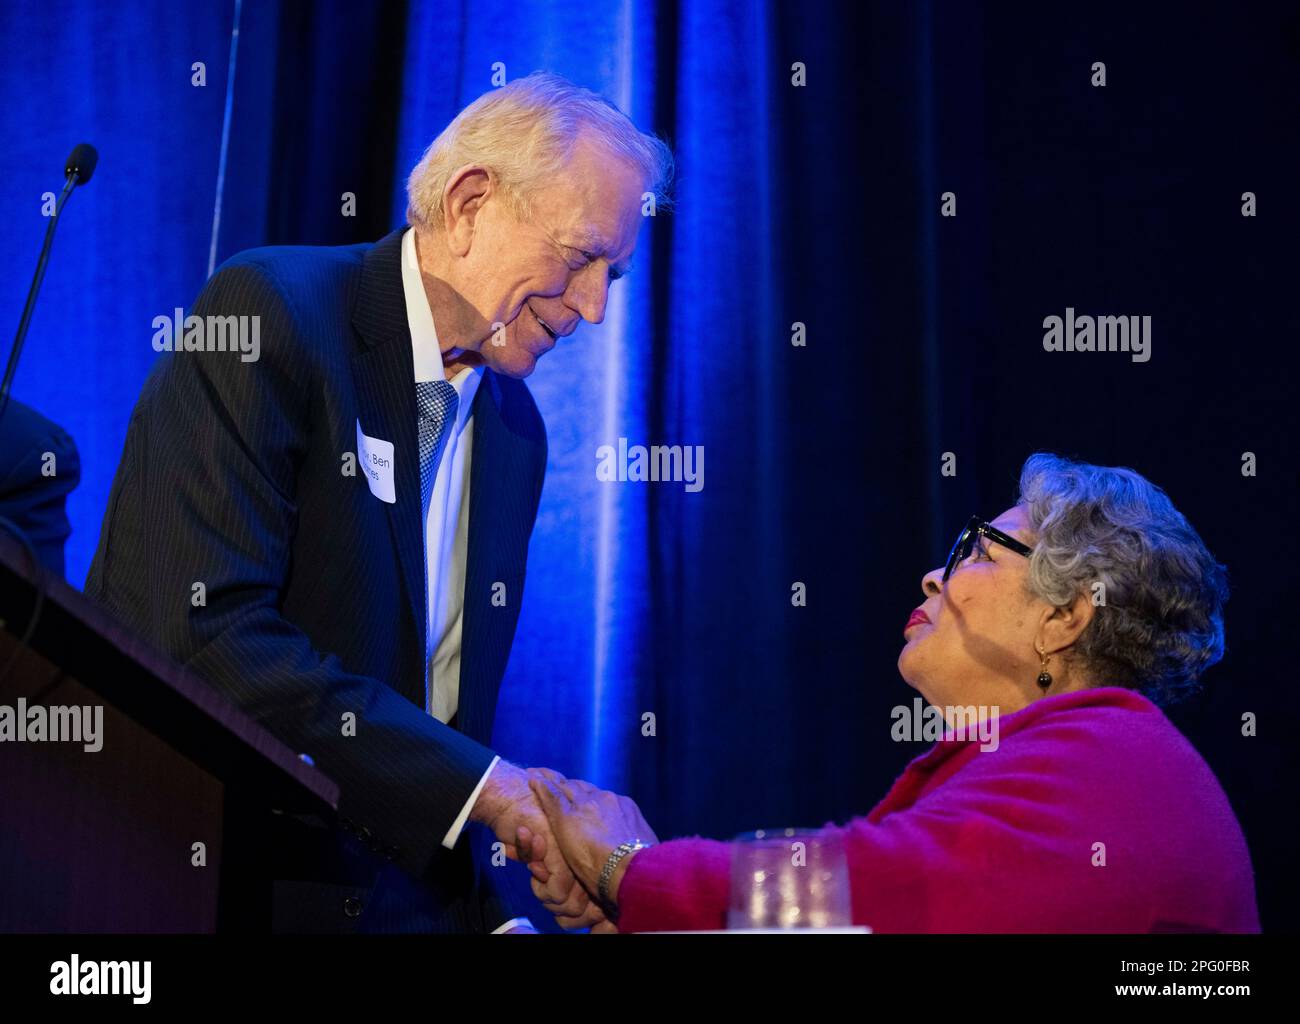 Former Texas Speaker of the House, BEN BARNES, shown with State Rep. SENFRONIA THOMPSON of Houston at a February 13, 2023 Austin political gathering, admitted in a New York Times article published this weekend of unwittingly working against the reelection of President Jimmy Carter in 1980.  Barnes and now deceased former Texas Governor John Connally traveled to the Middle East secretly lobbying to not release the Iran hostages until after Ronald Reagan's election victory. Stock Photo